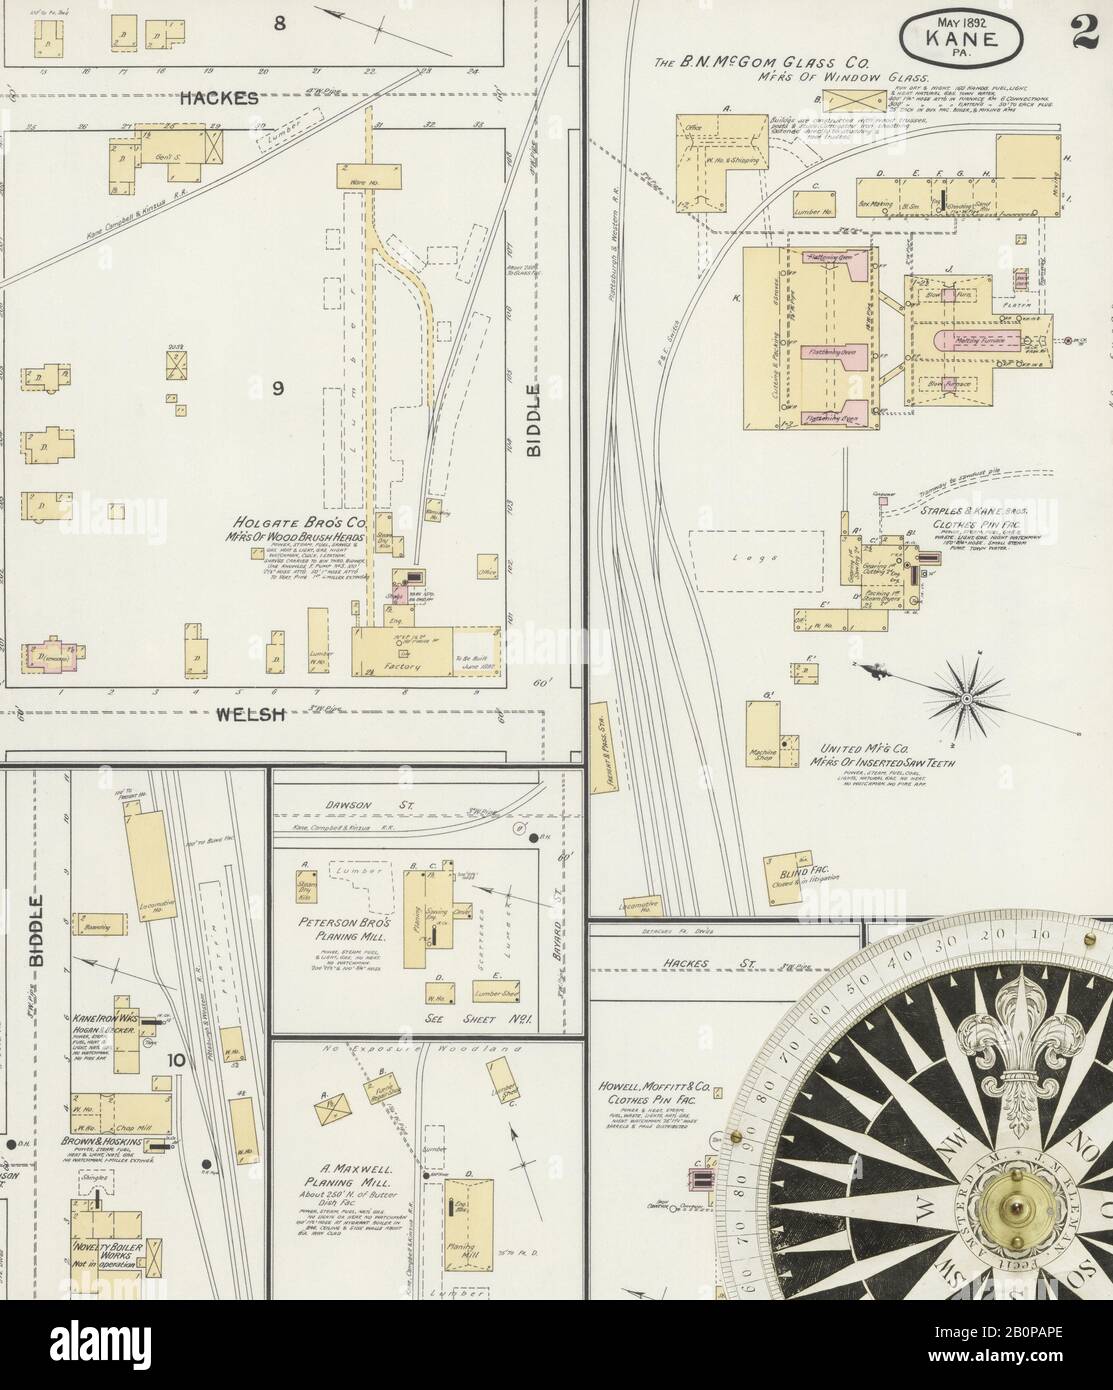 Image 2 of Sanborn Fire Insurance Map from Kane, McKean County, Pennsylvania. May 1892. 2 Sheet(s), America, street map with a Nineteenth Century compass Stock Photo